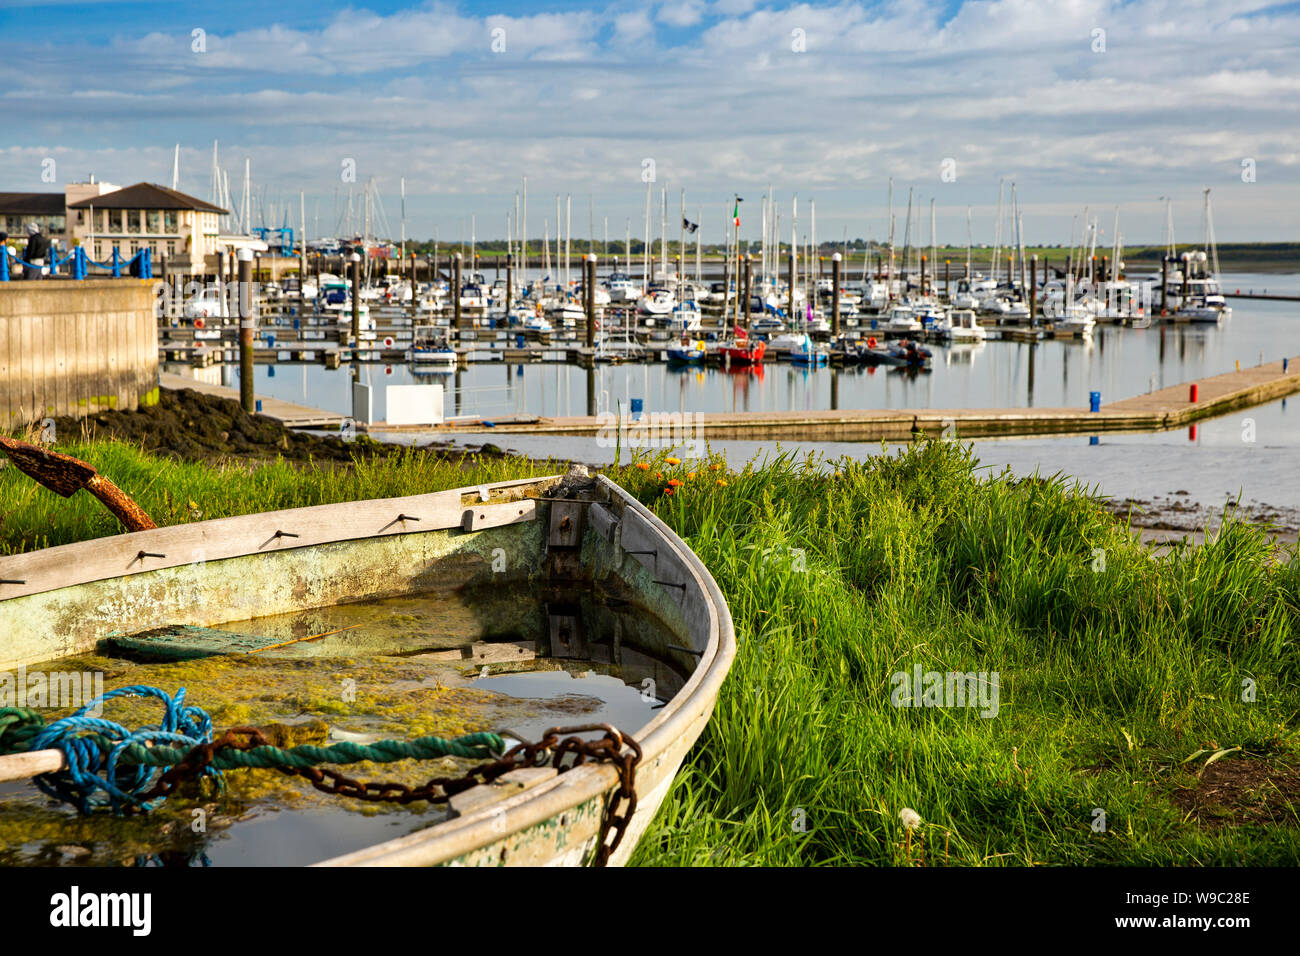 Ireland, Leinster, Fingal, Co Dublin, Malahide, water filled rowing boat above the Marina Stock Photo